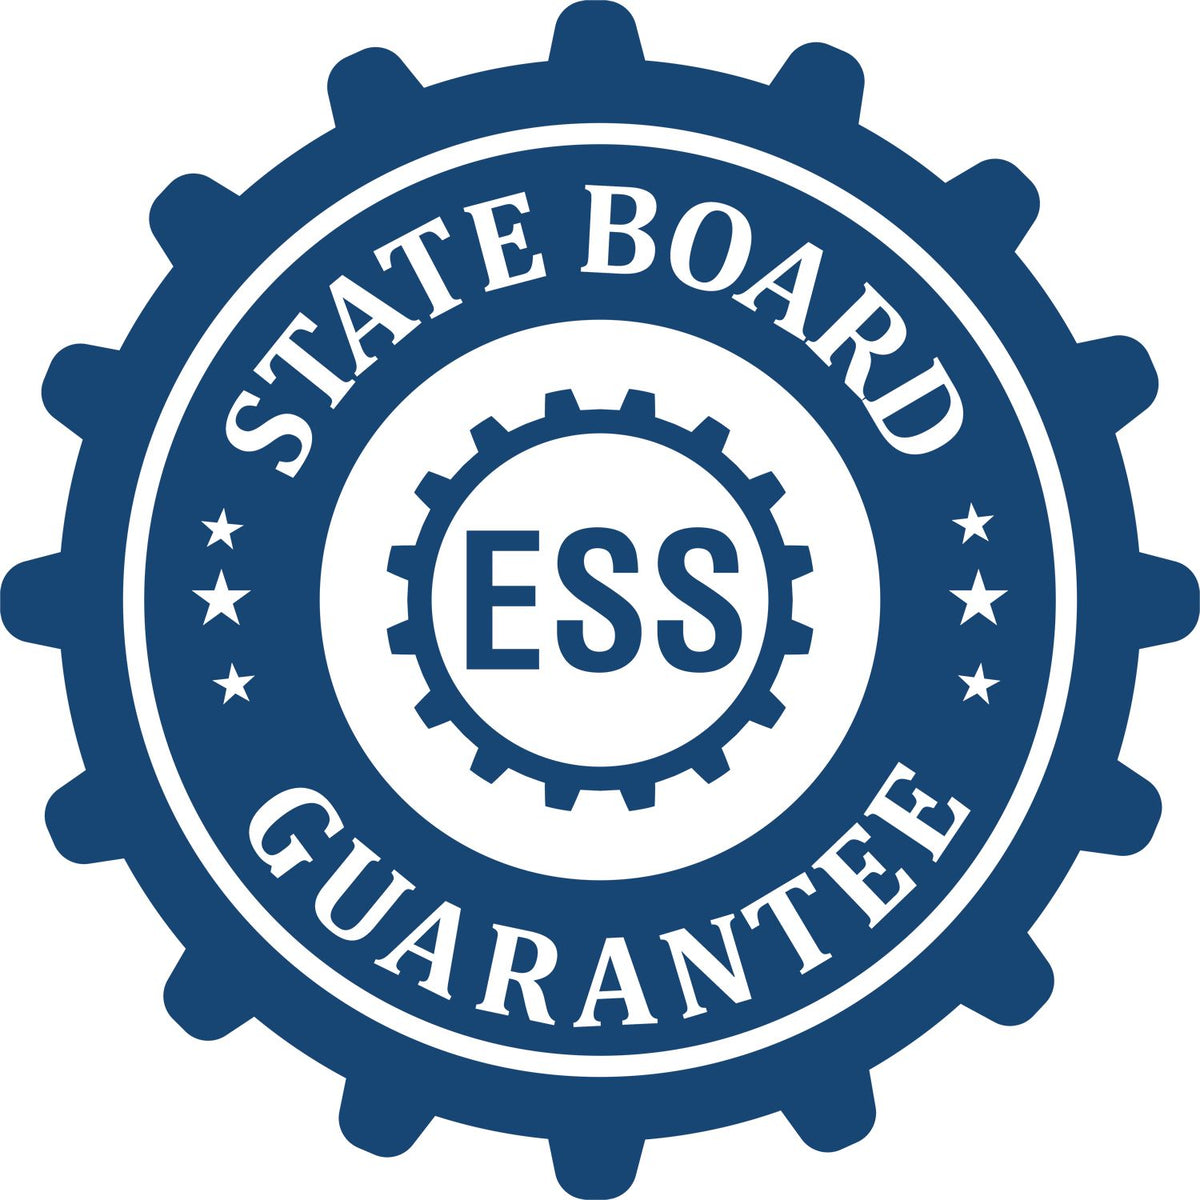 An emblem in a gear shape illustrating a state board guarantee for the Soft Indiana Professional Engineer Seal product.